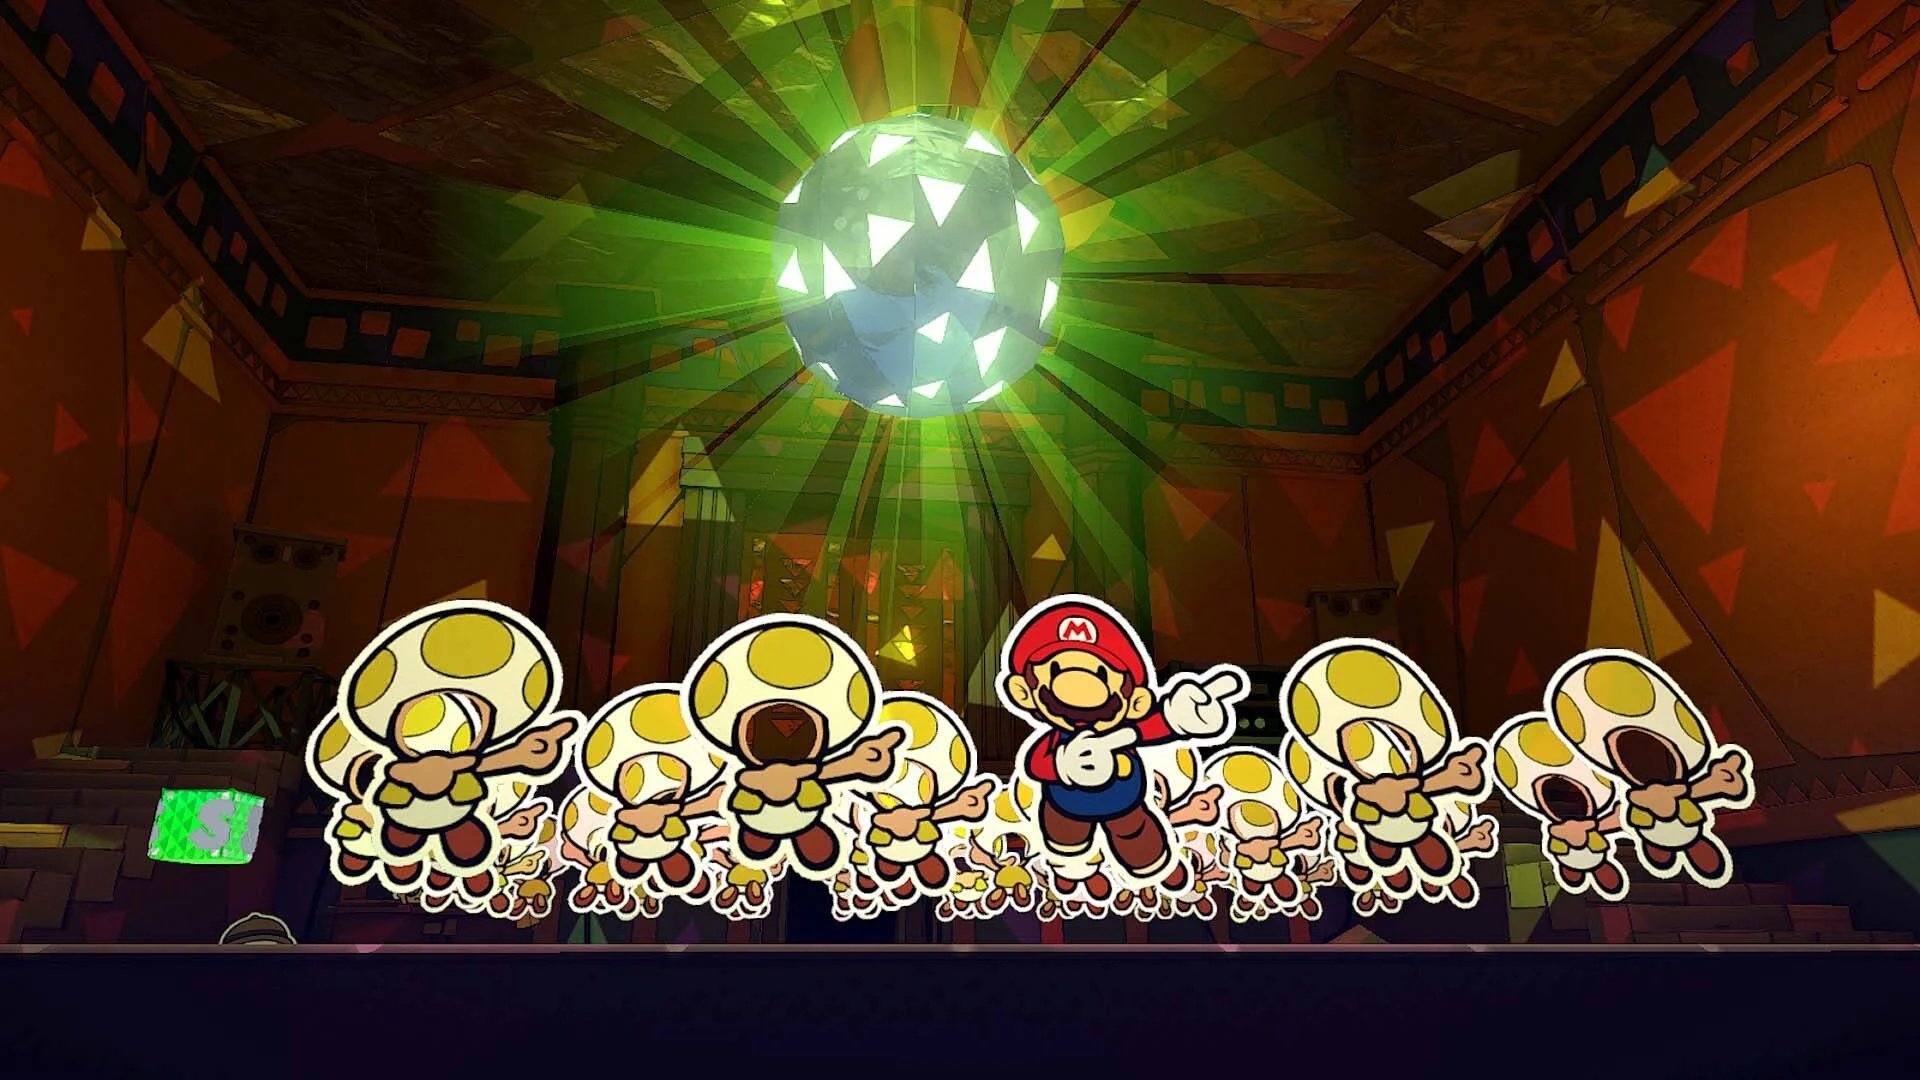 Paper Mario Producer Says Team Is "No Longer Able To Graphically